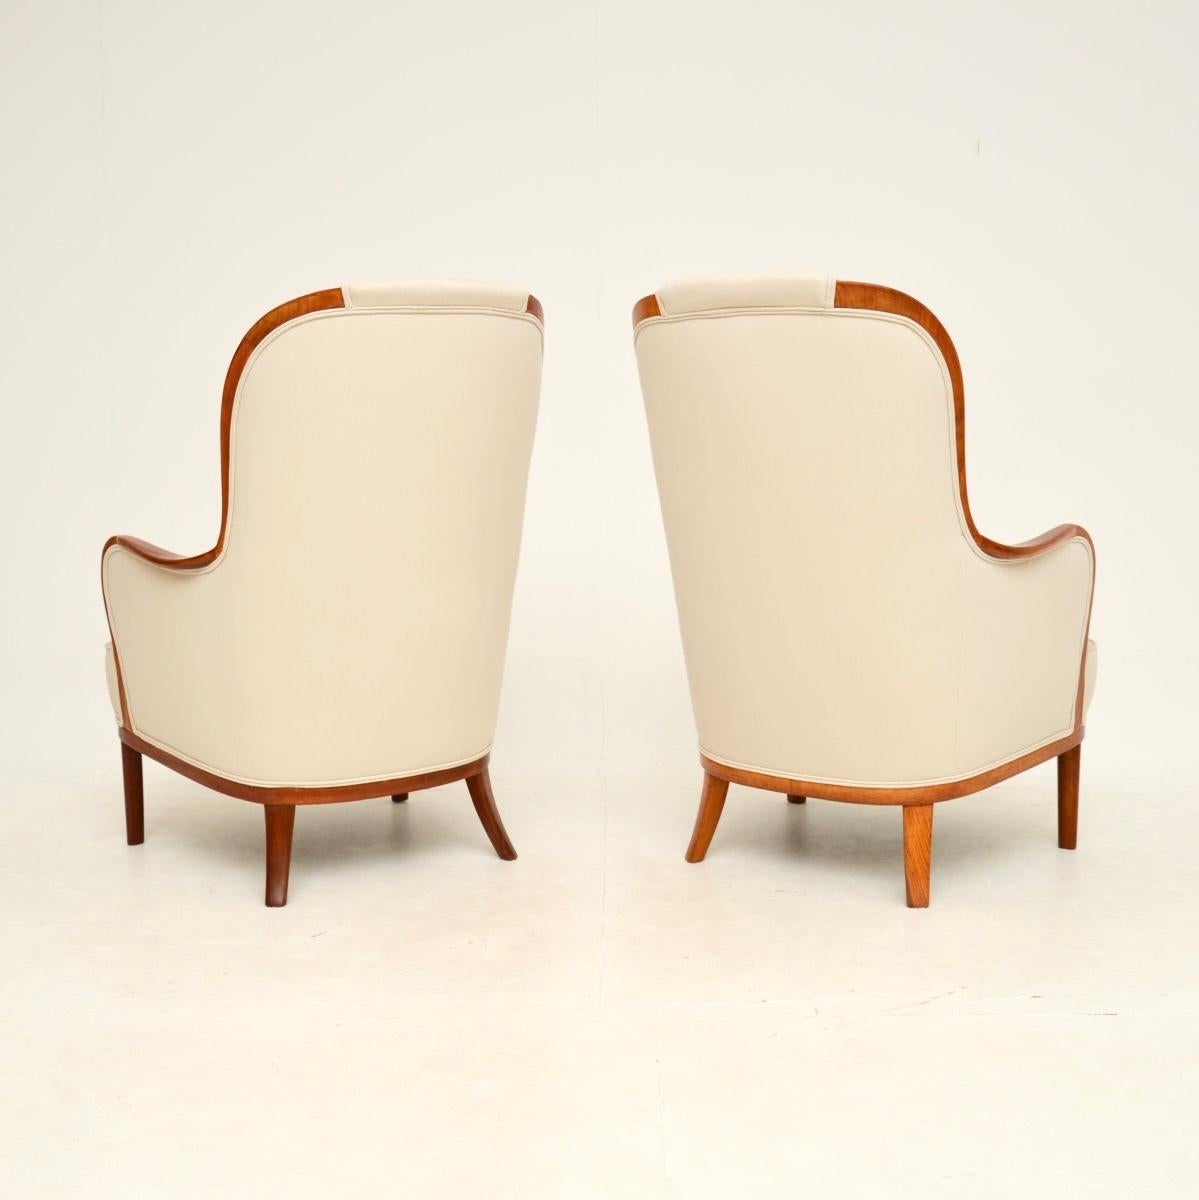 Pair of Vintage Swedish Armchairs by Carl Malmsten In Good Condition For Sale In London, GB